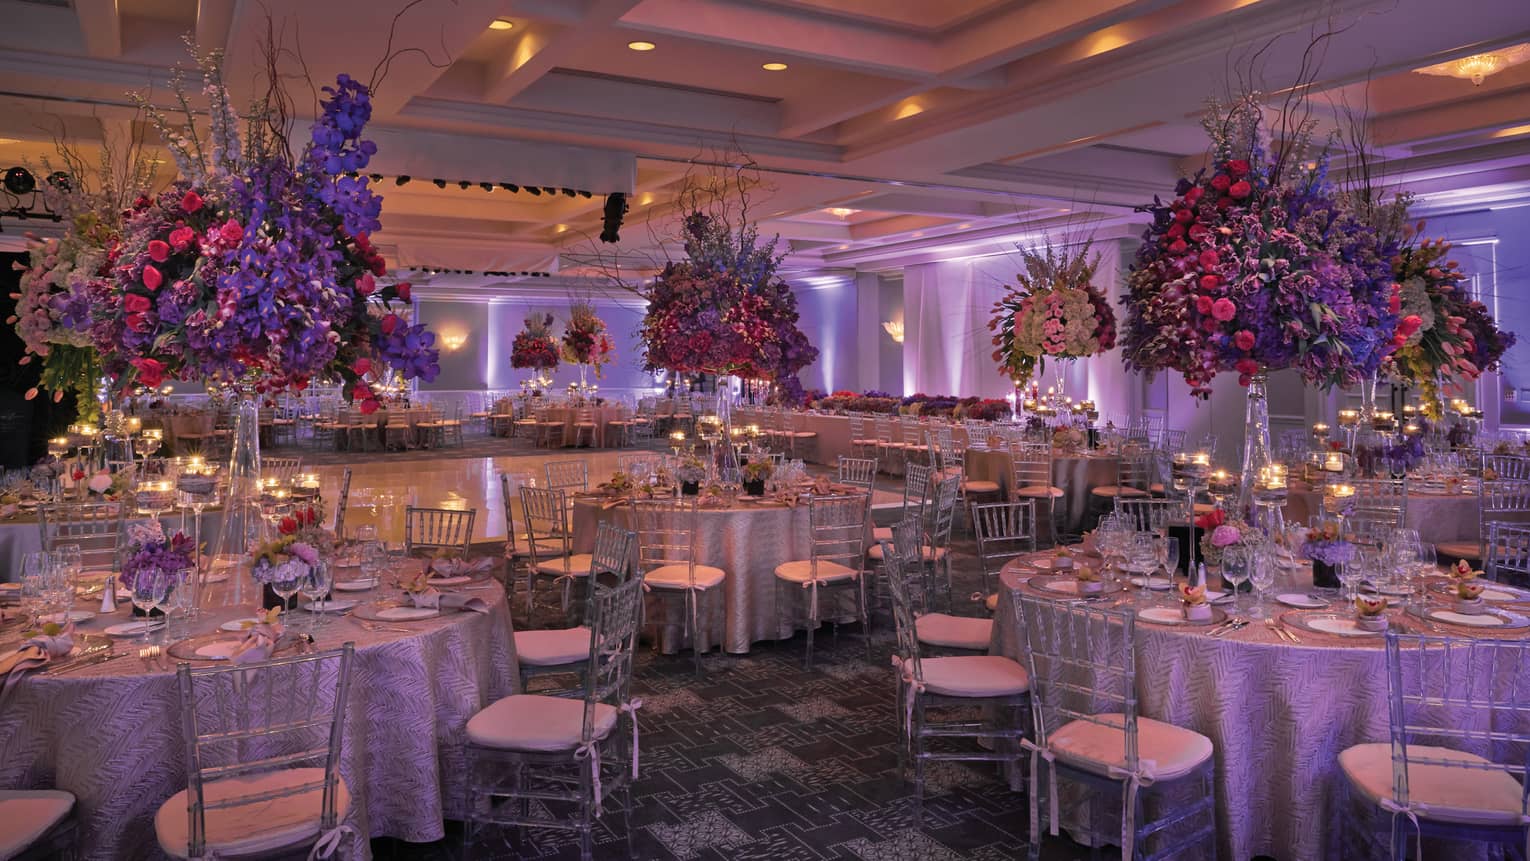 Royal Poinciana candle-lit ballroom with purple lights, tropical flower-filled banquet tables